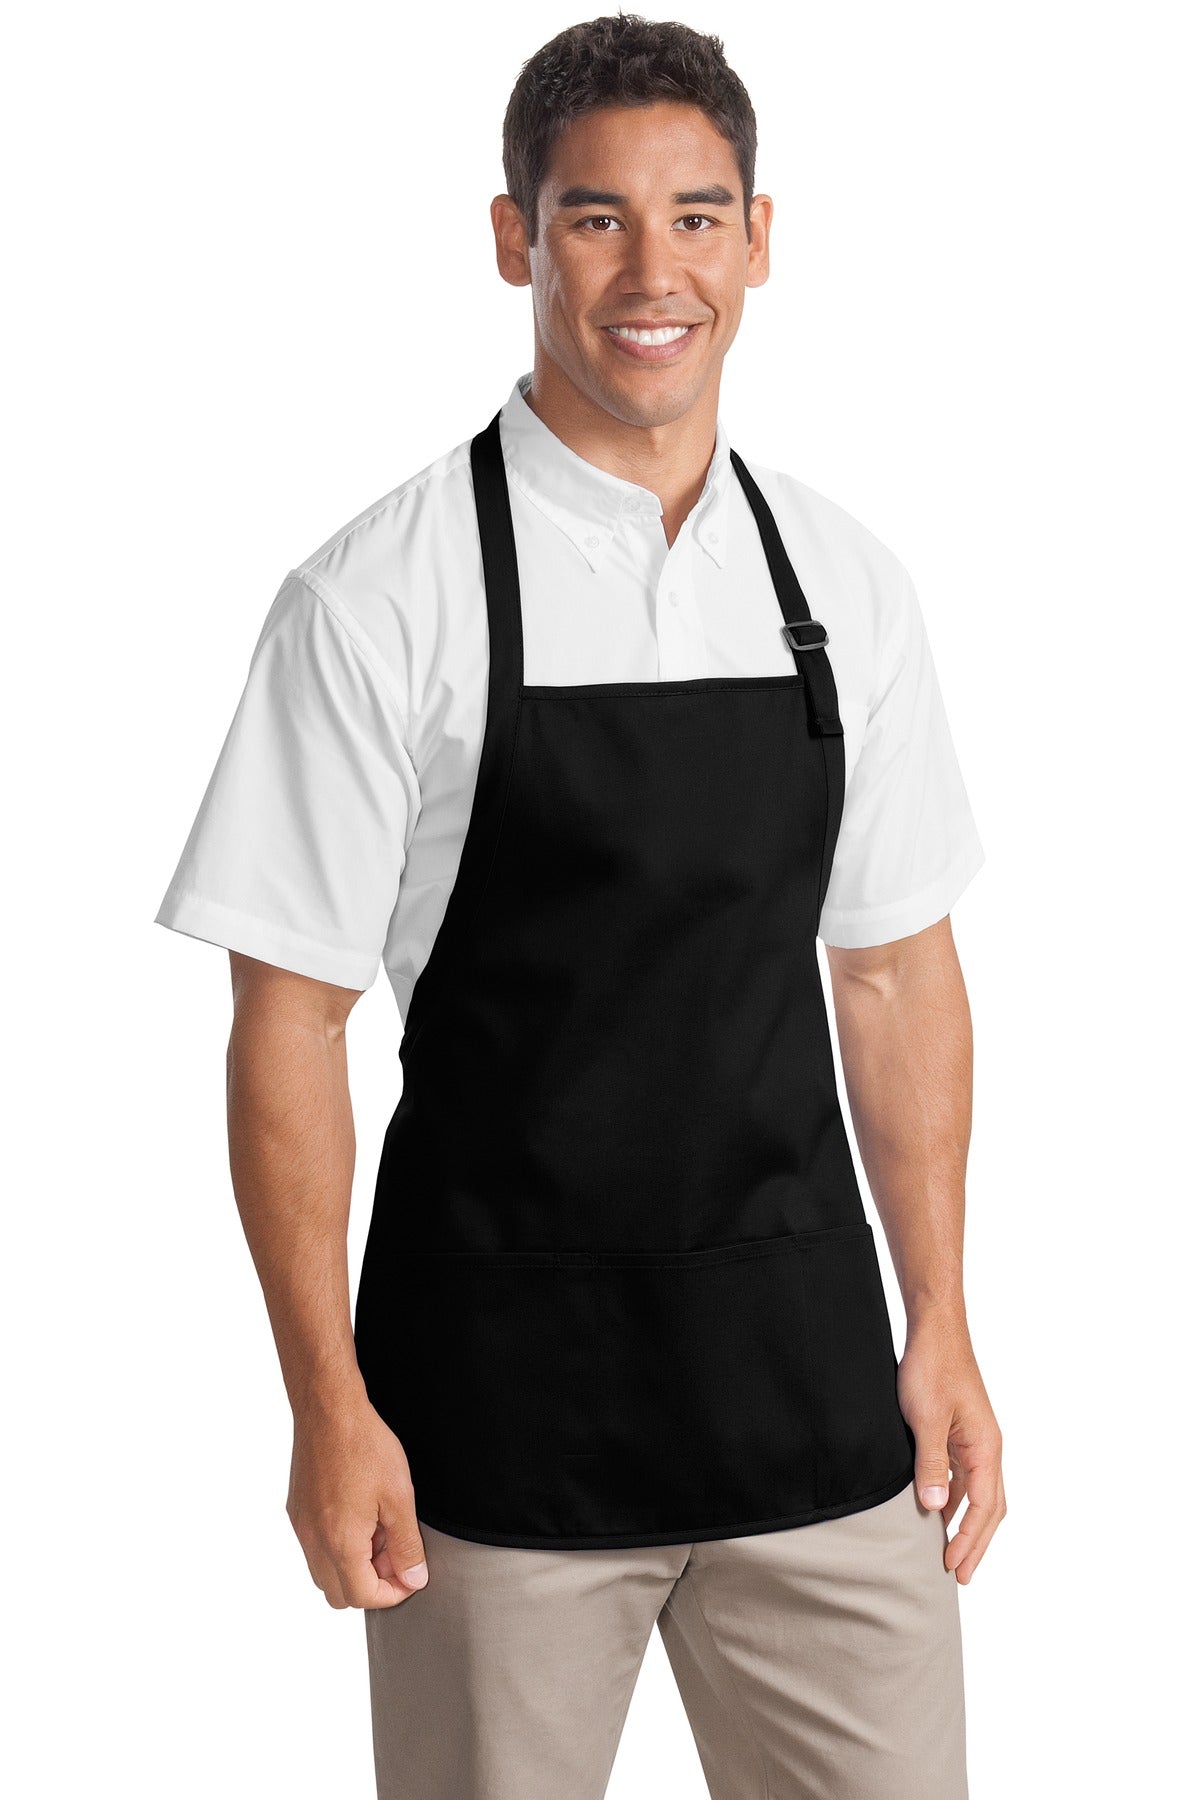 Port Authority Medium-Length Apron with Pouch Pockets. A510